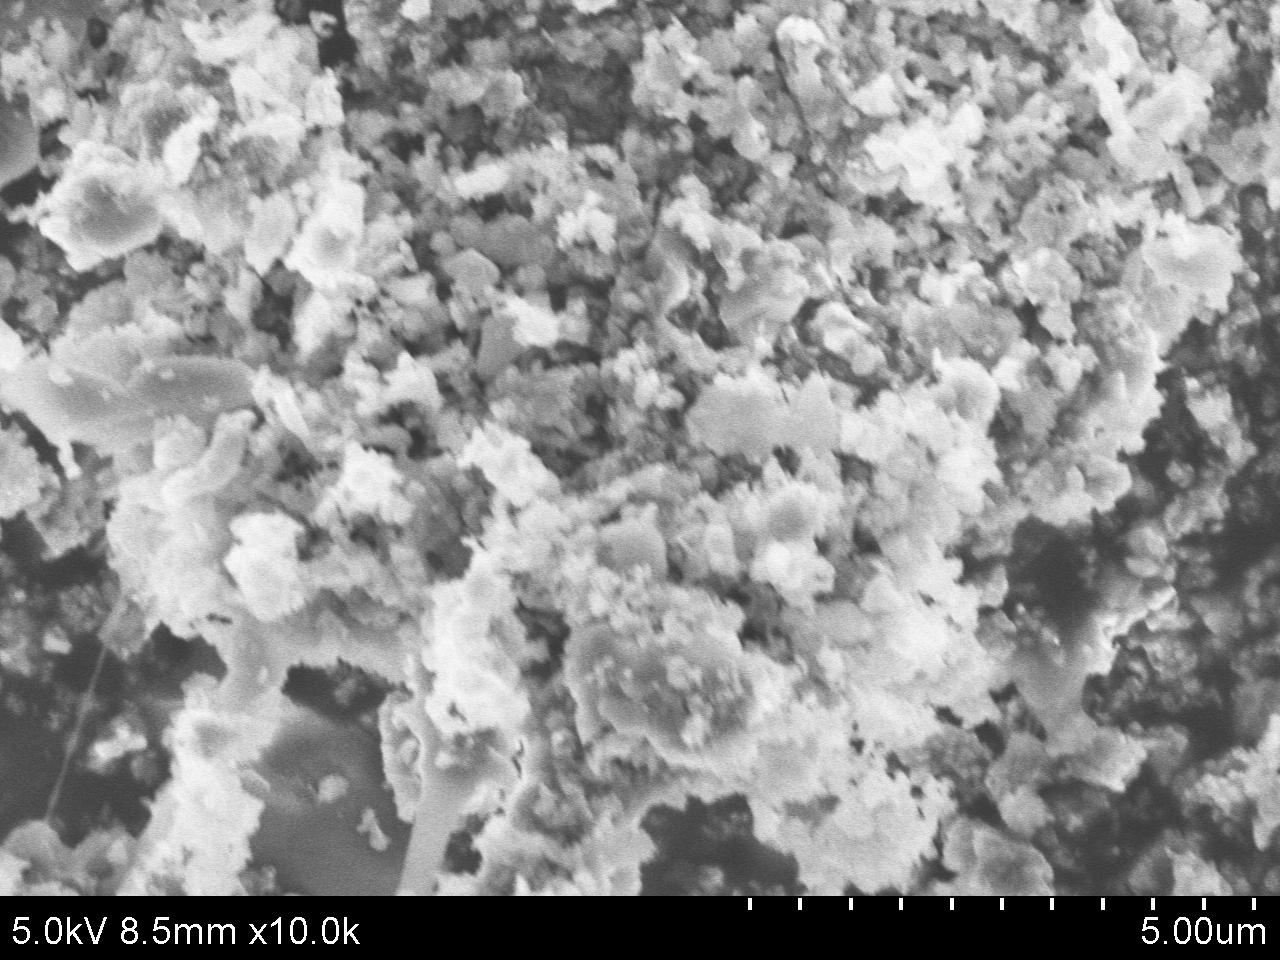 Typical SEM Image of ACS Material Porous Silicon (1)